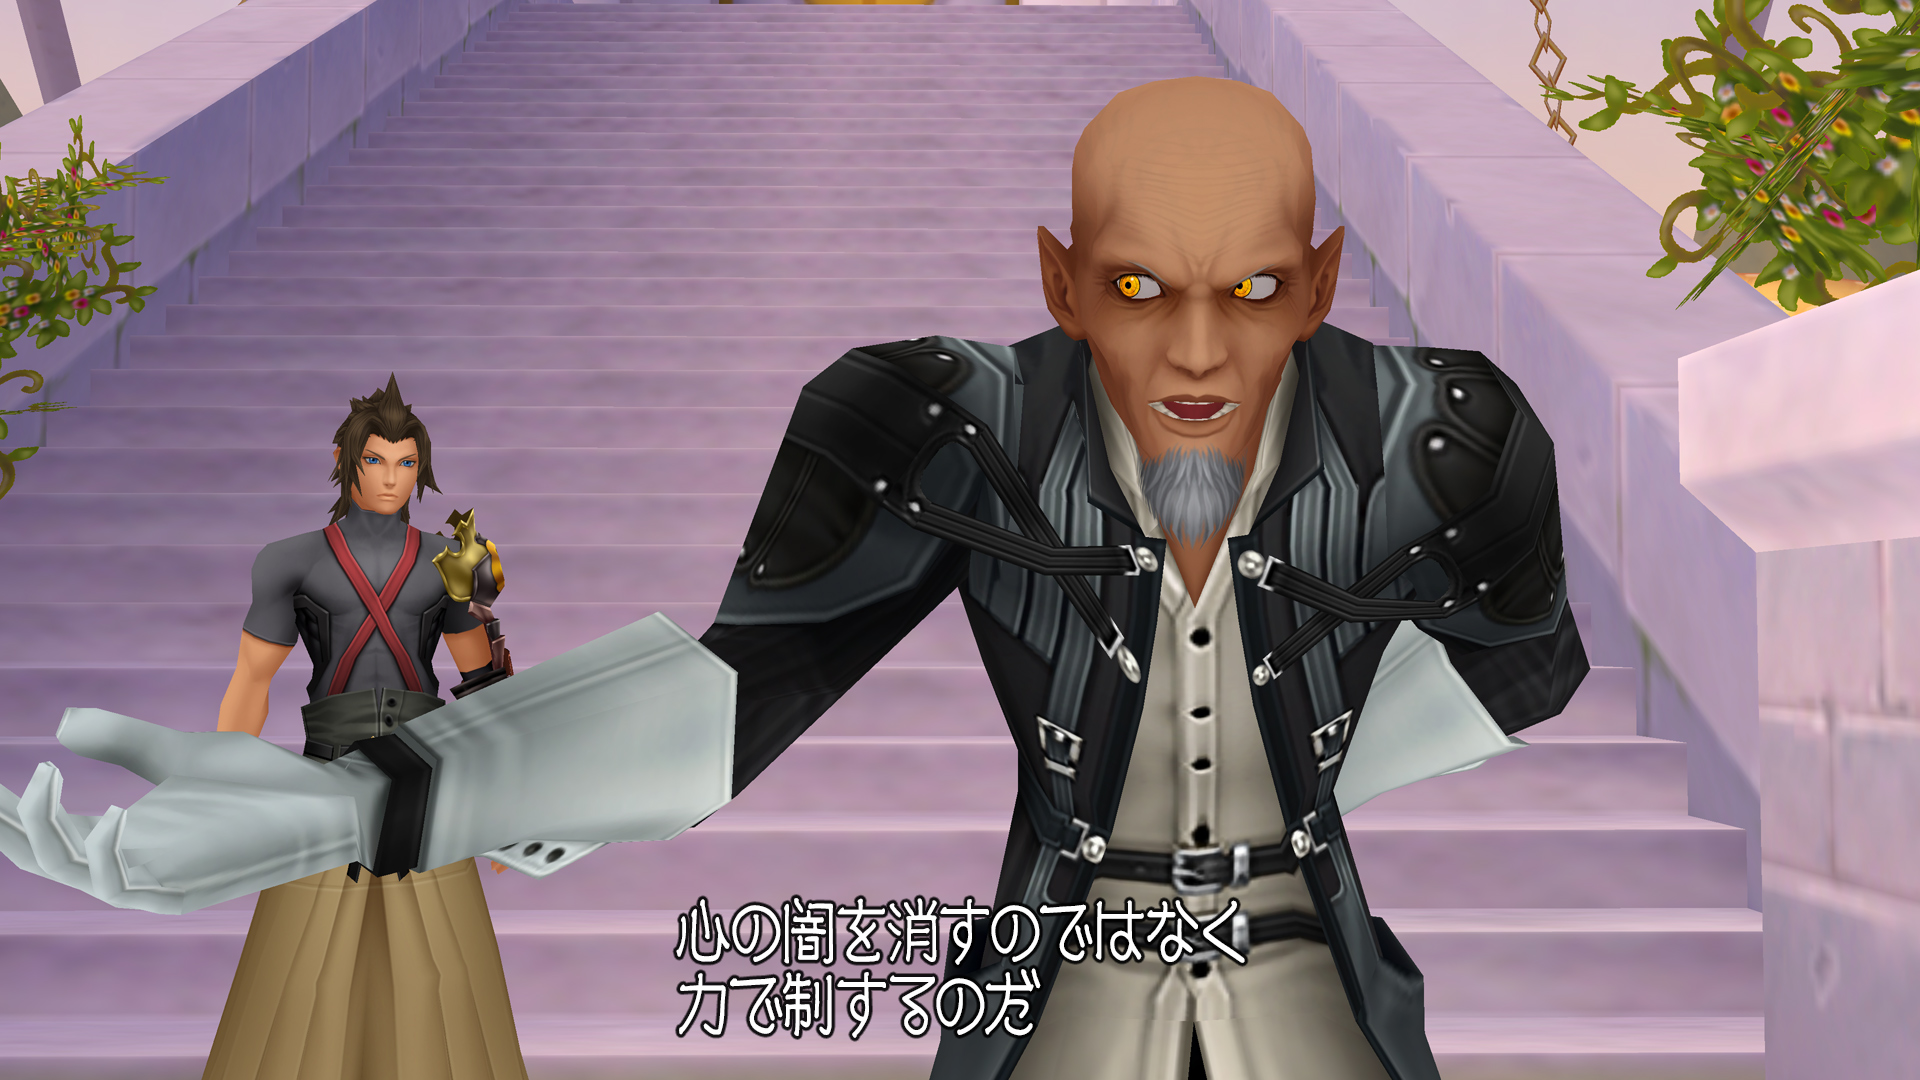 kingdom-hearts-2-5-website-updates-with-bbs-and-new-trailer-news-kingdom-hearts-insider